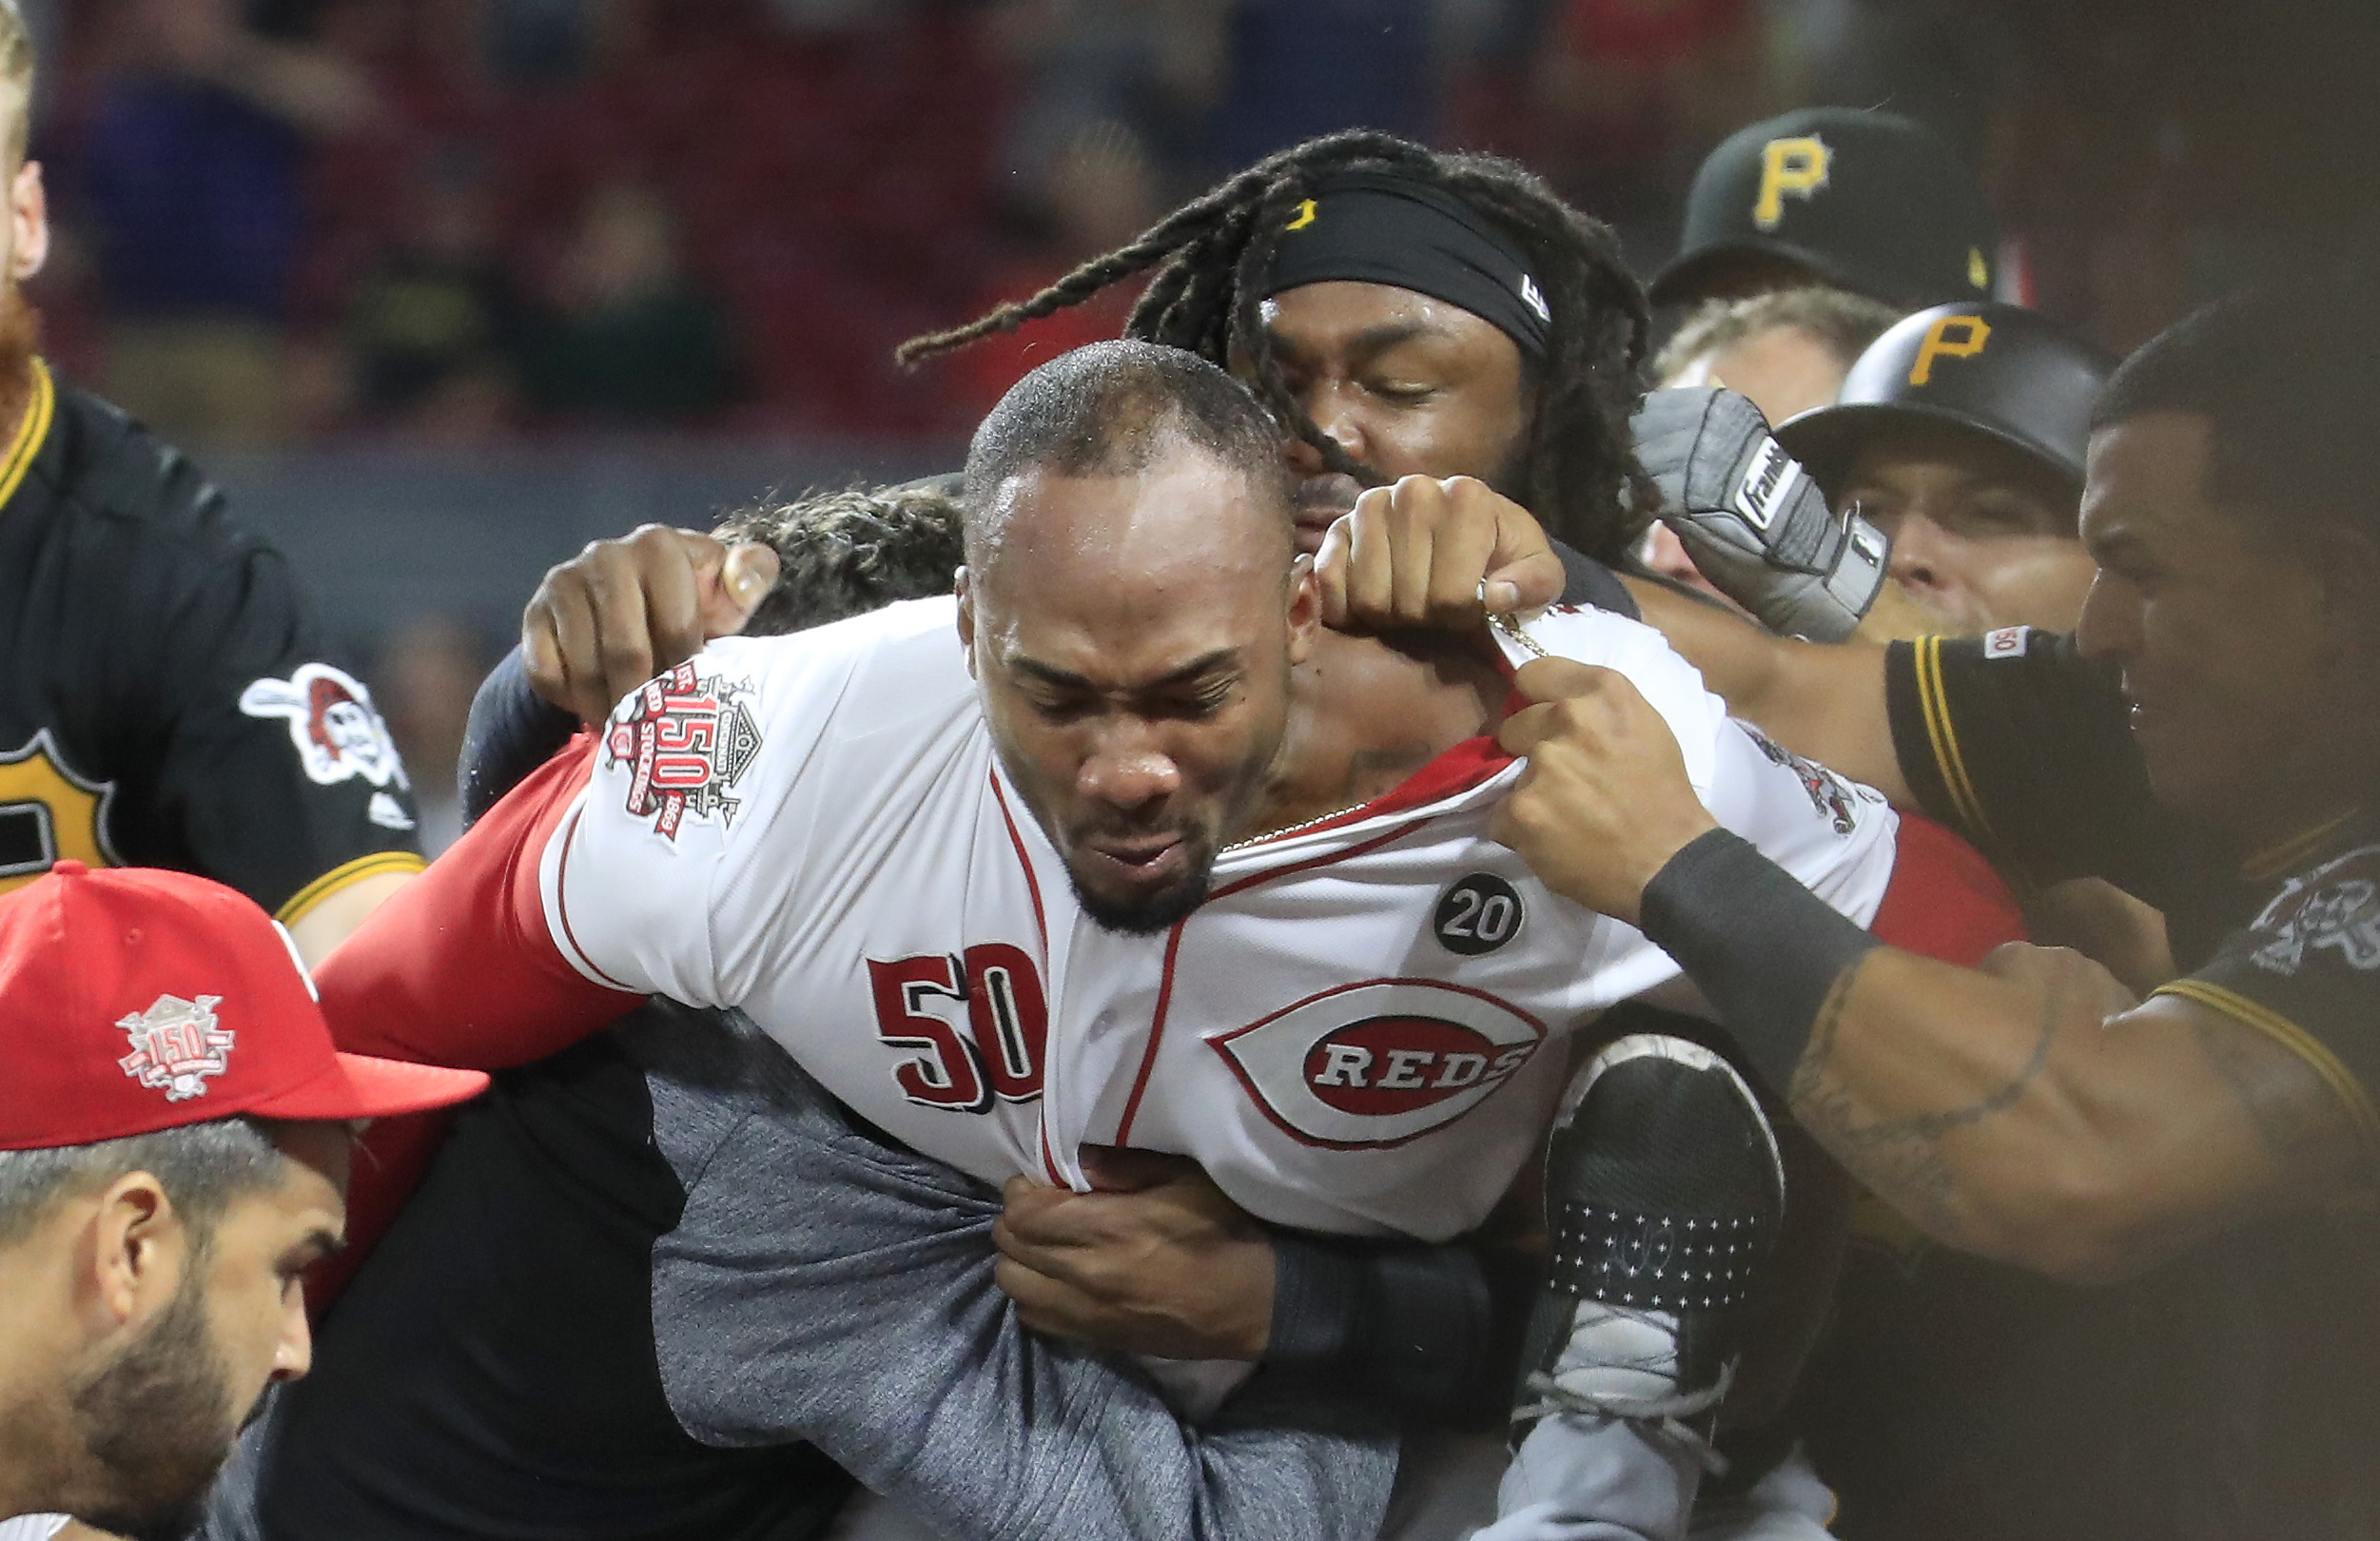 Reds' Puig: 'I never worked hard' with Dodgers